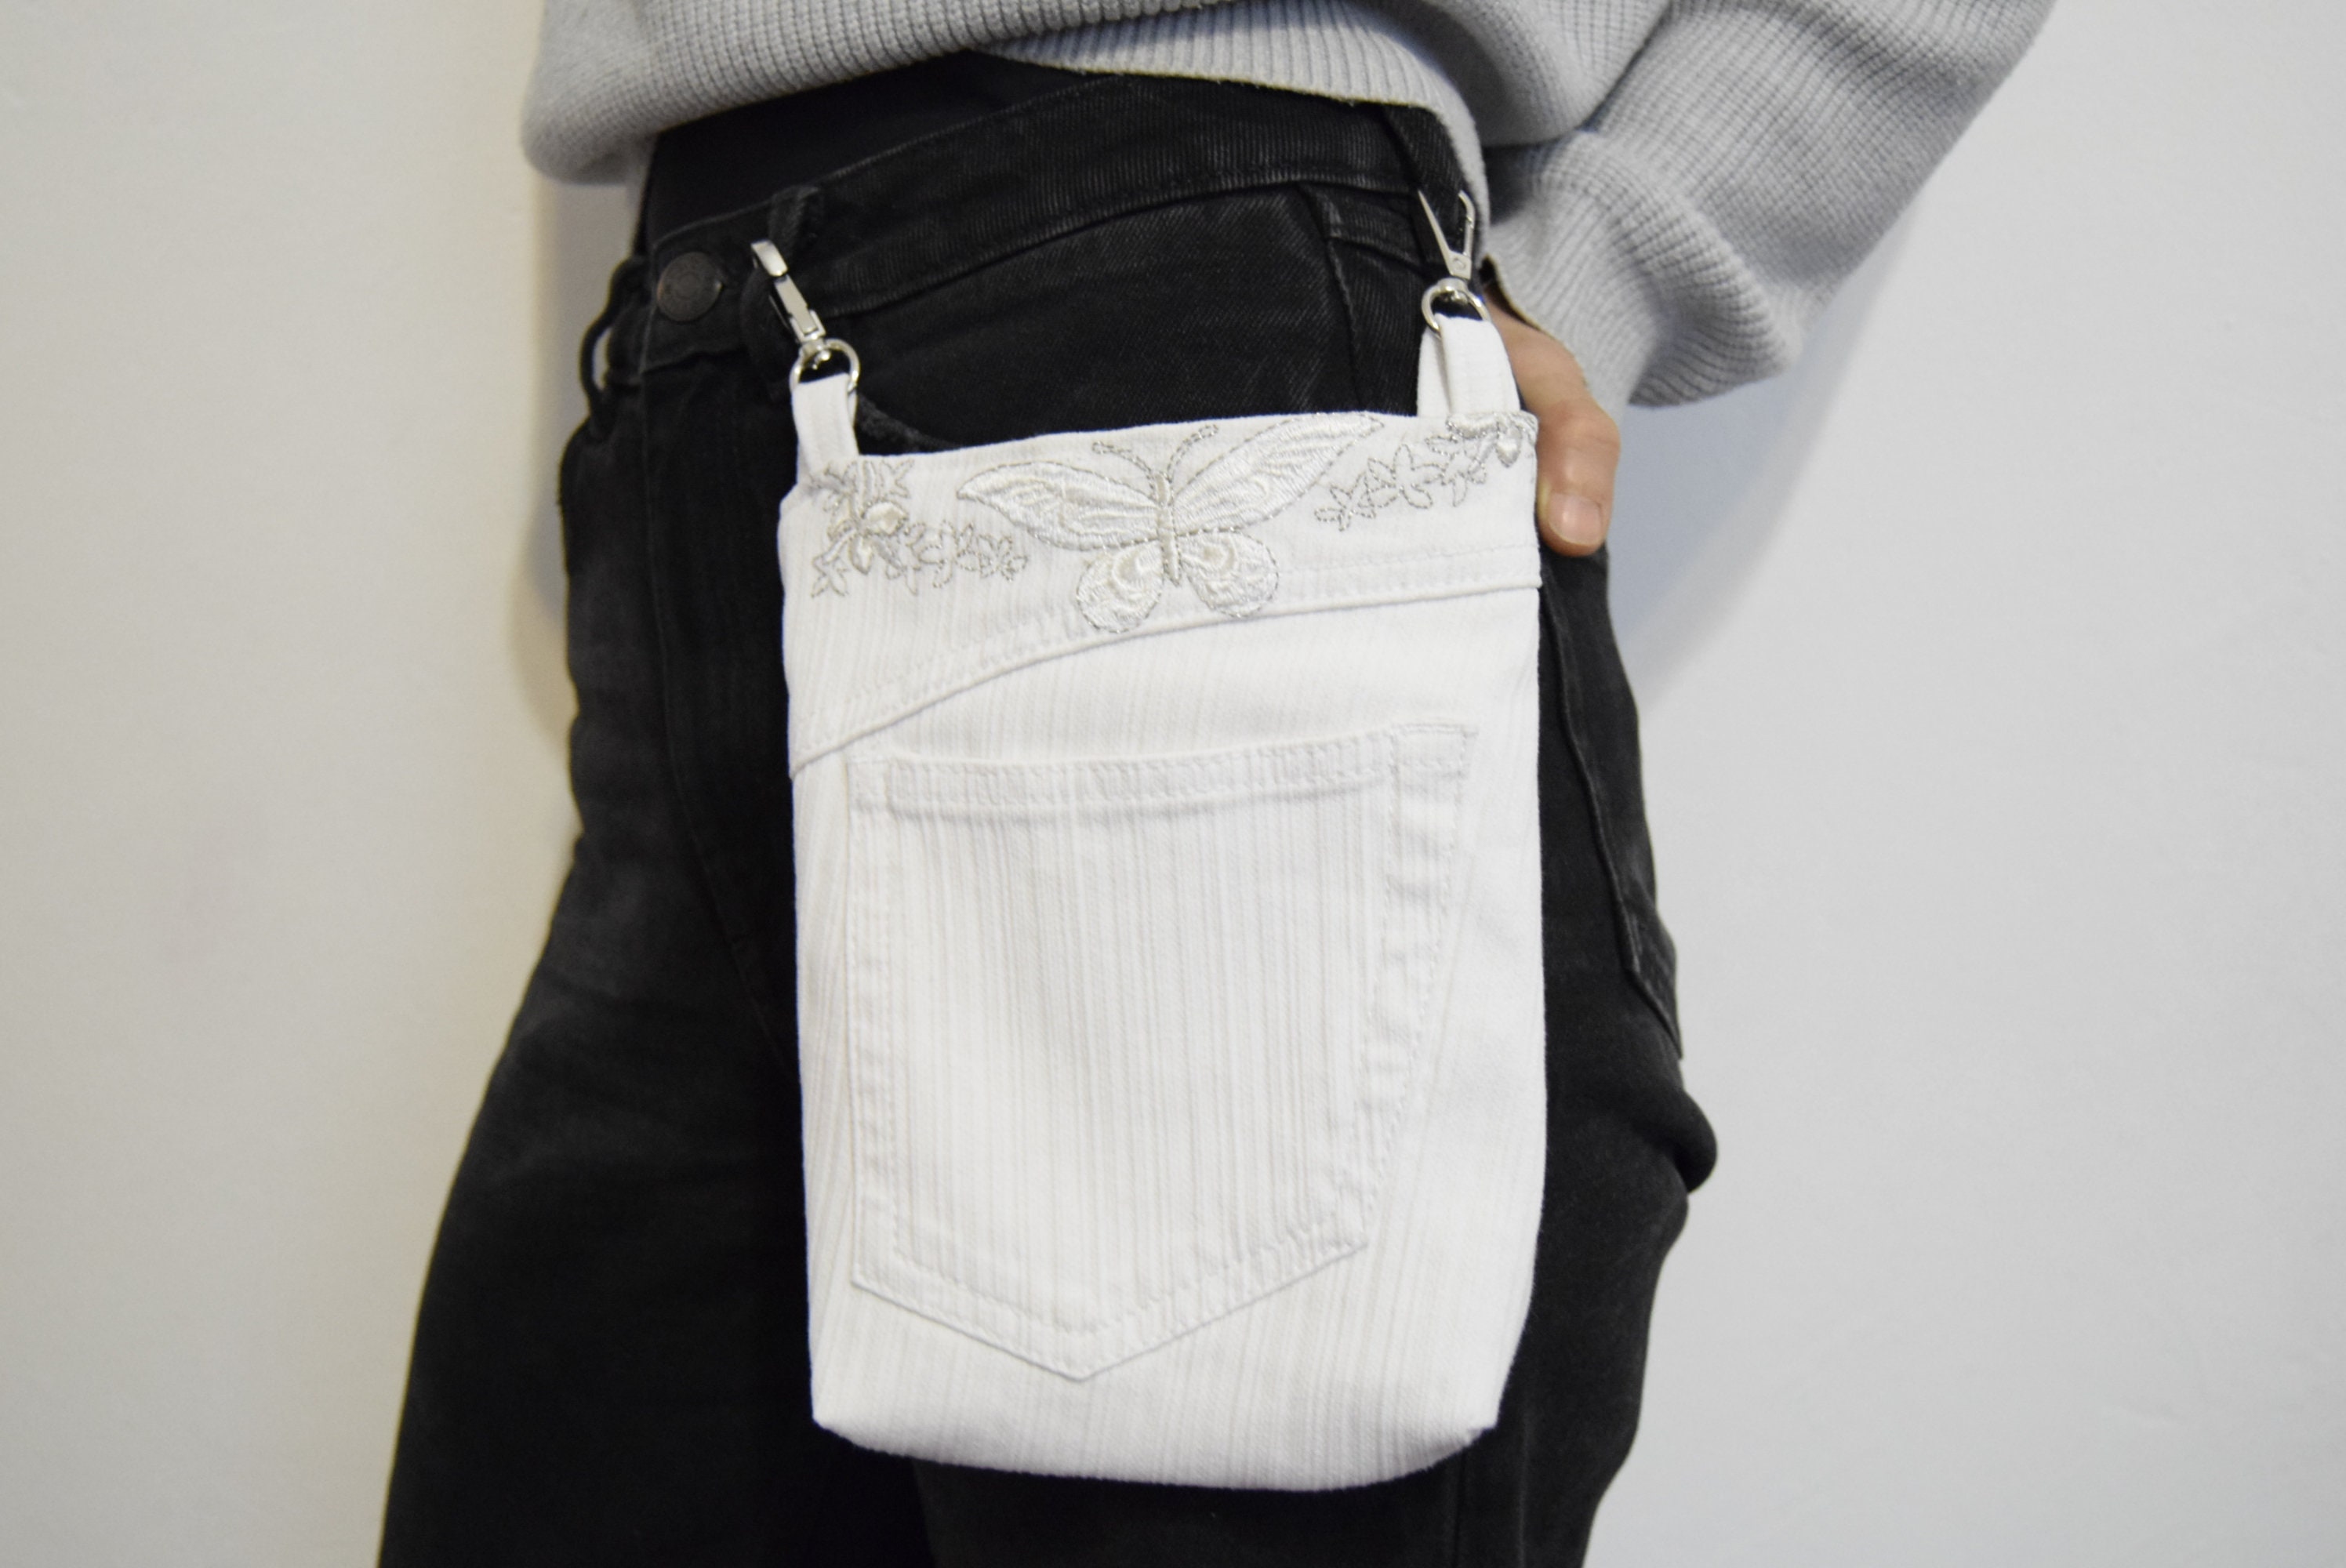 Buy Jeans Waist Bag Online In India -  India